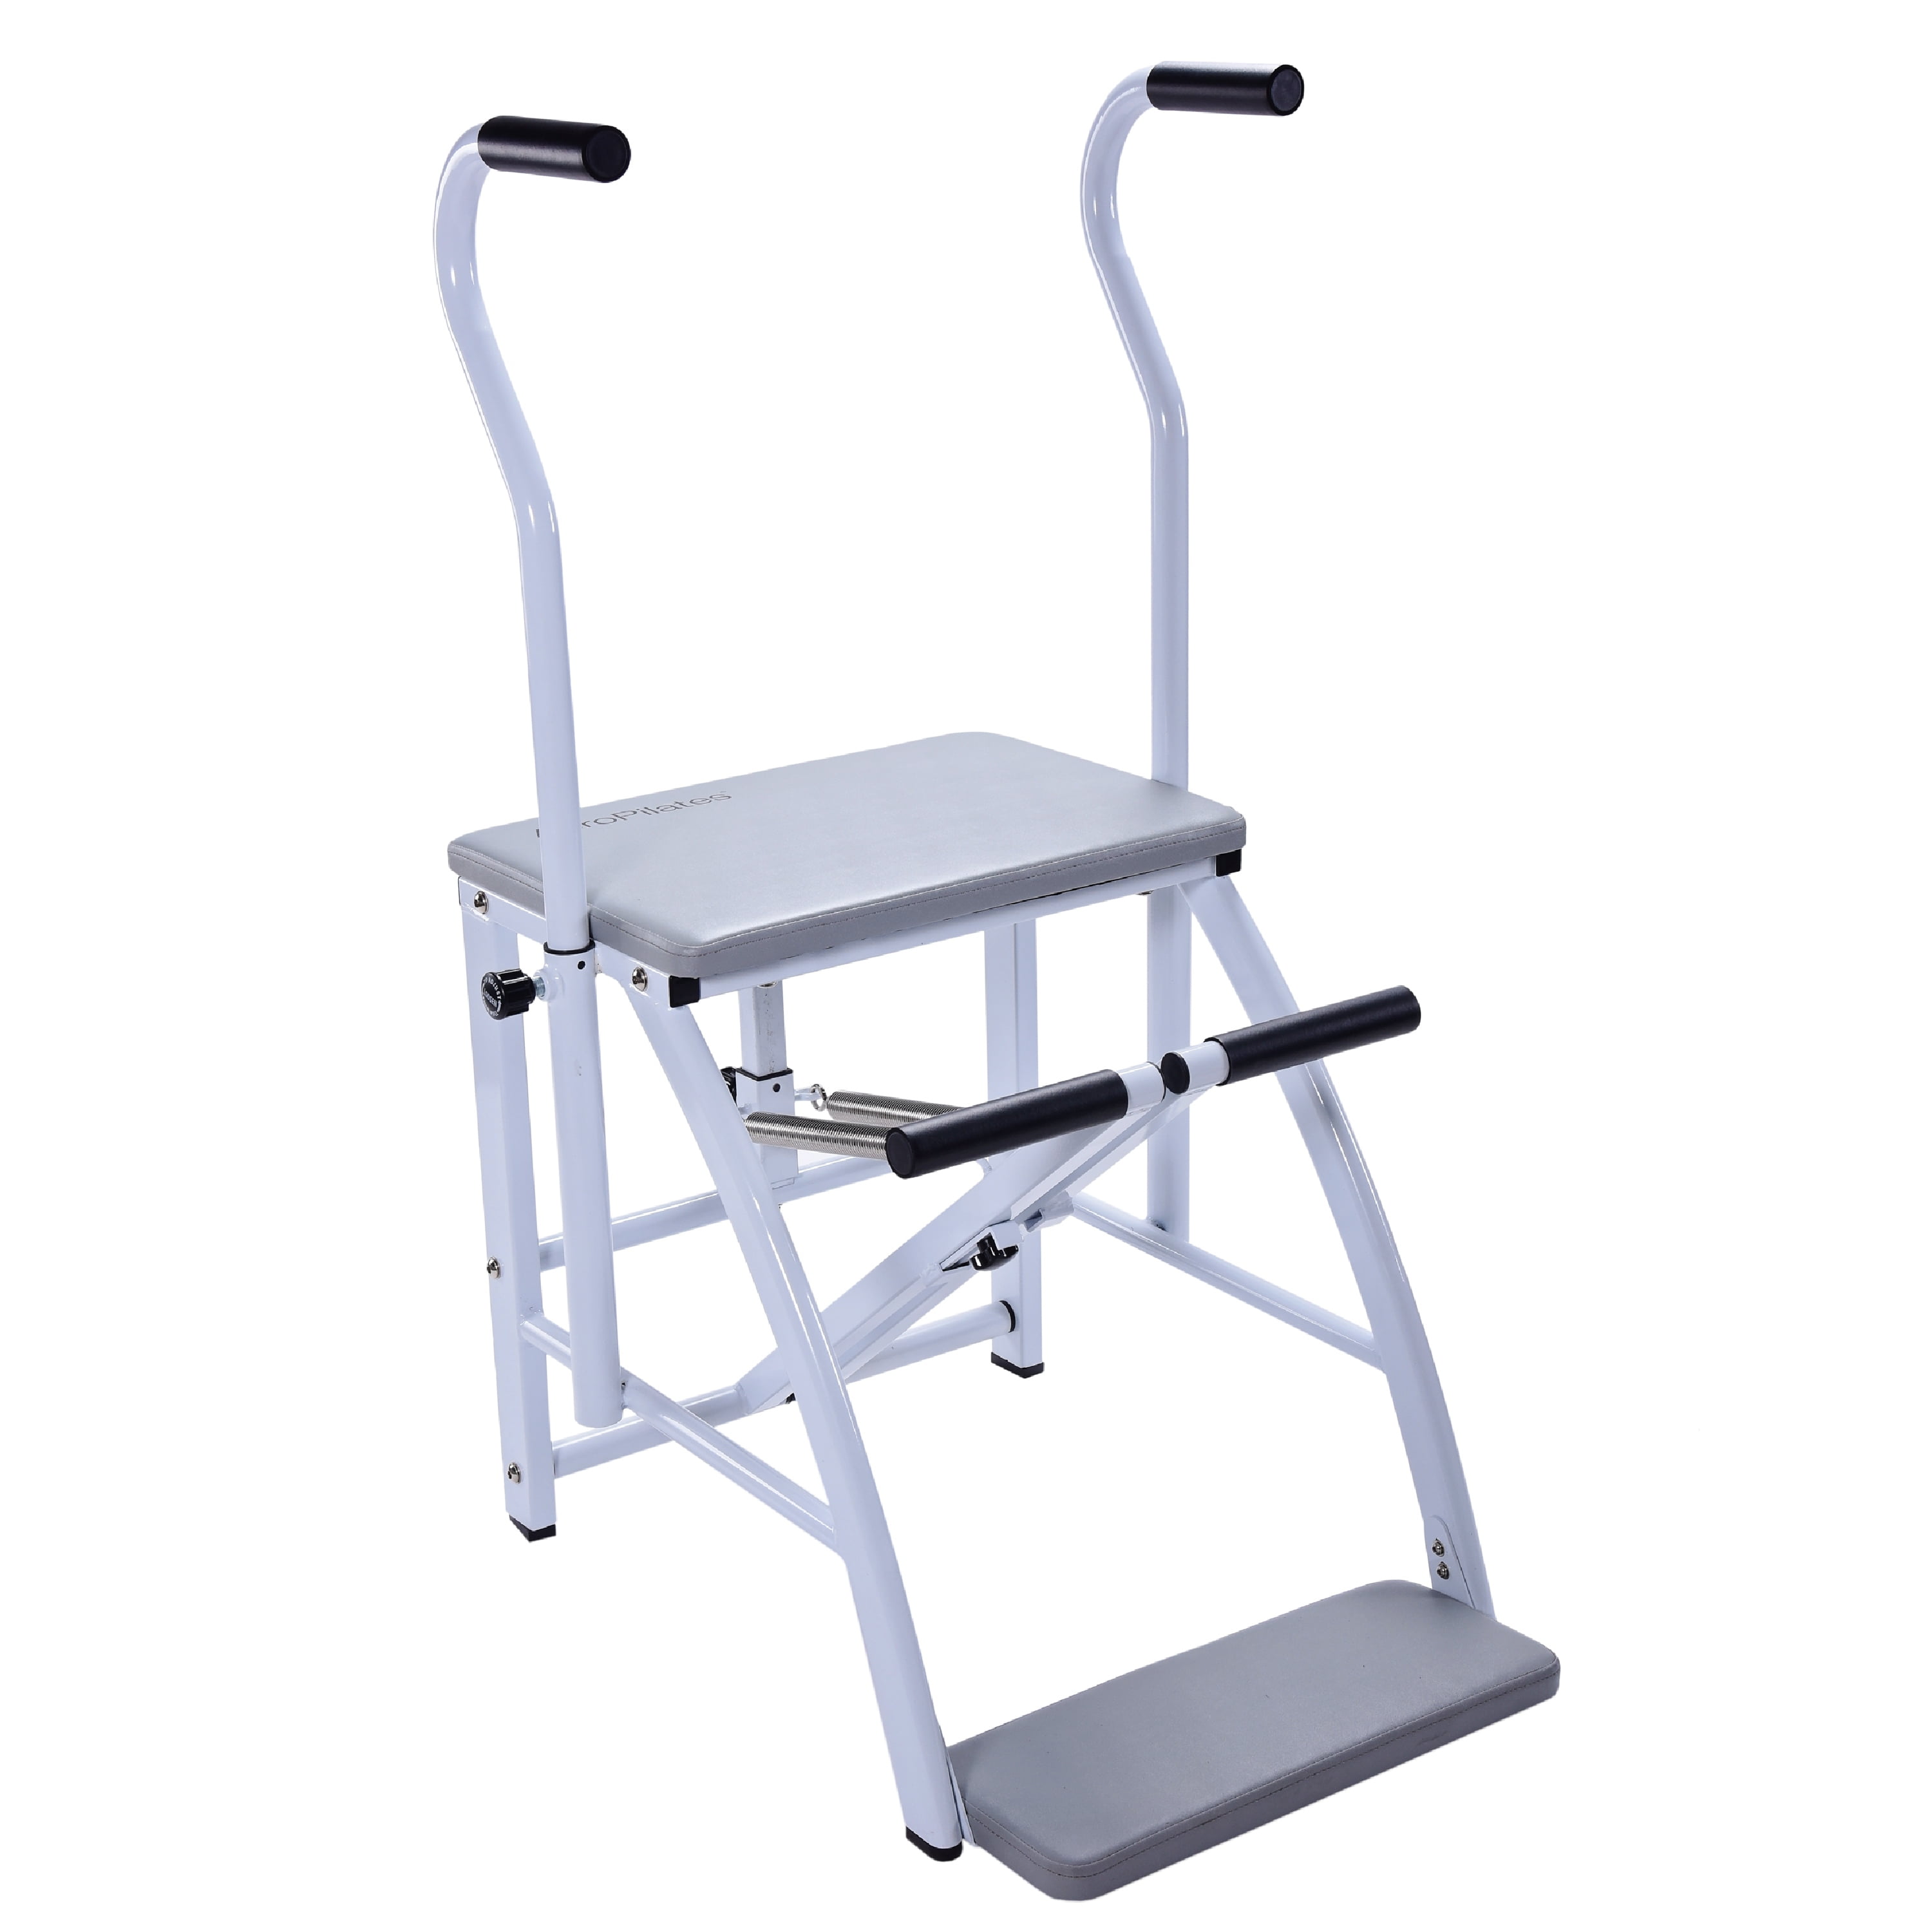 Find Custom and Top Quality Malibu Pilates Chair for All 